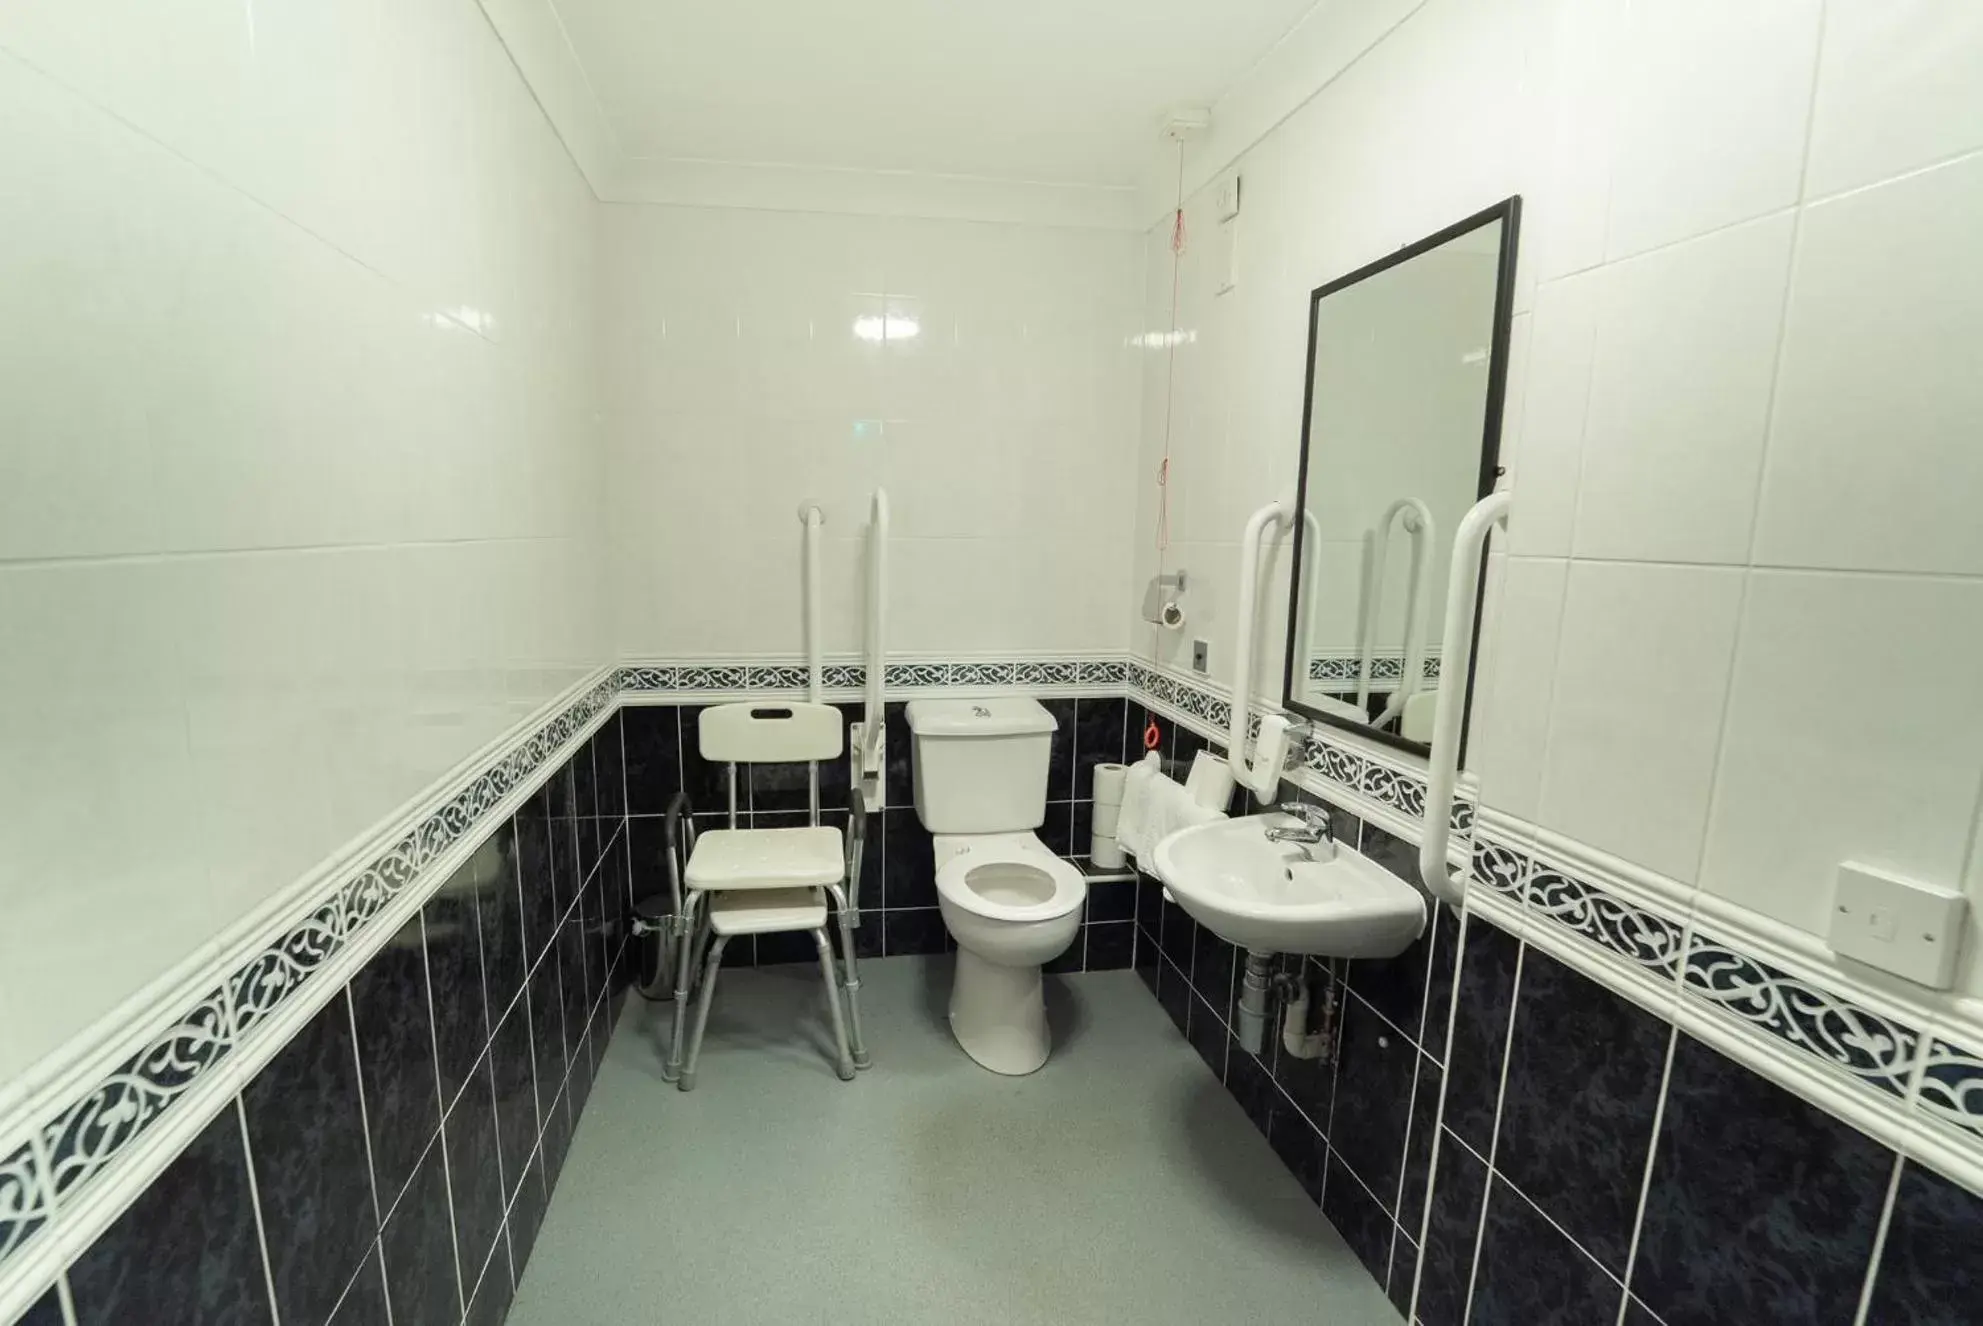 Facility for disabled guests, Bathroom in Littlebury Hotel